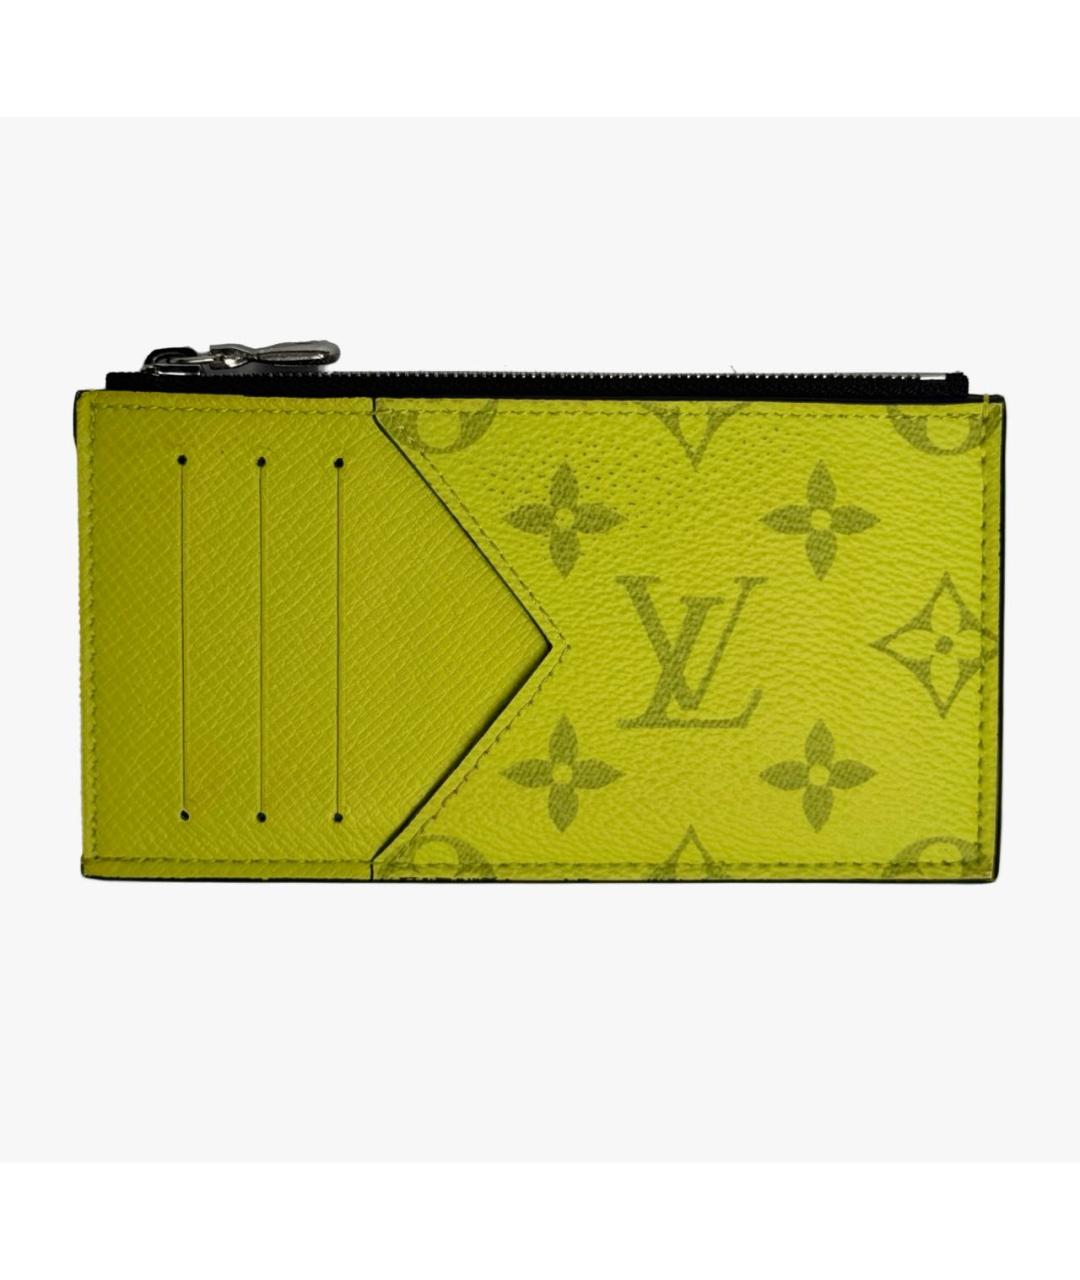 LOUIS VUITTON PRE-OWNED Желтый кардхолдер, фото 1